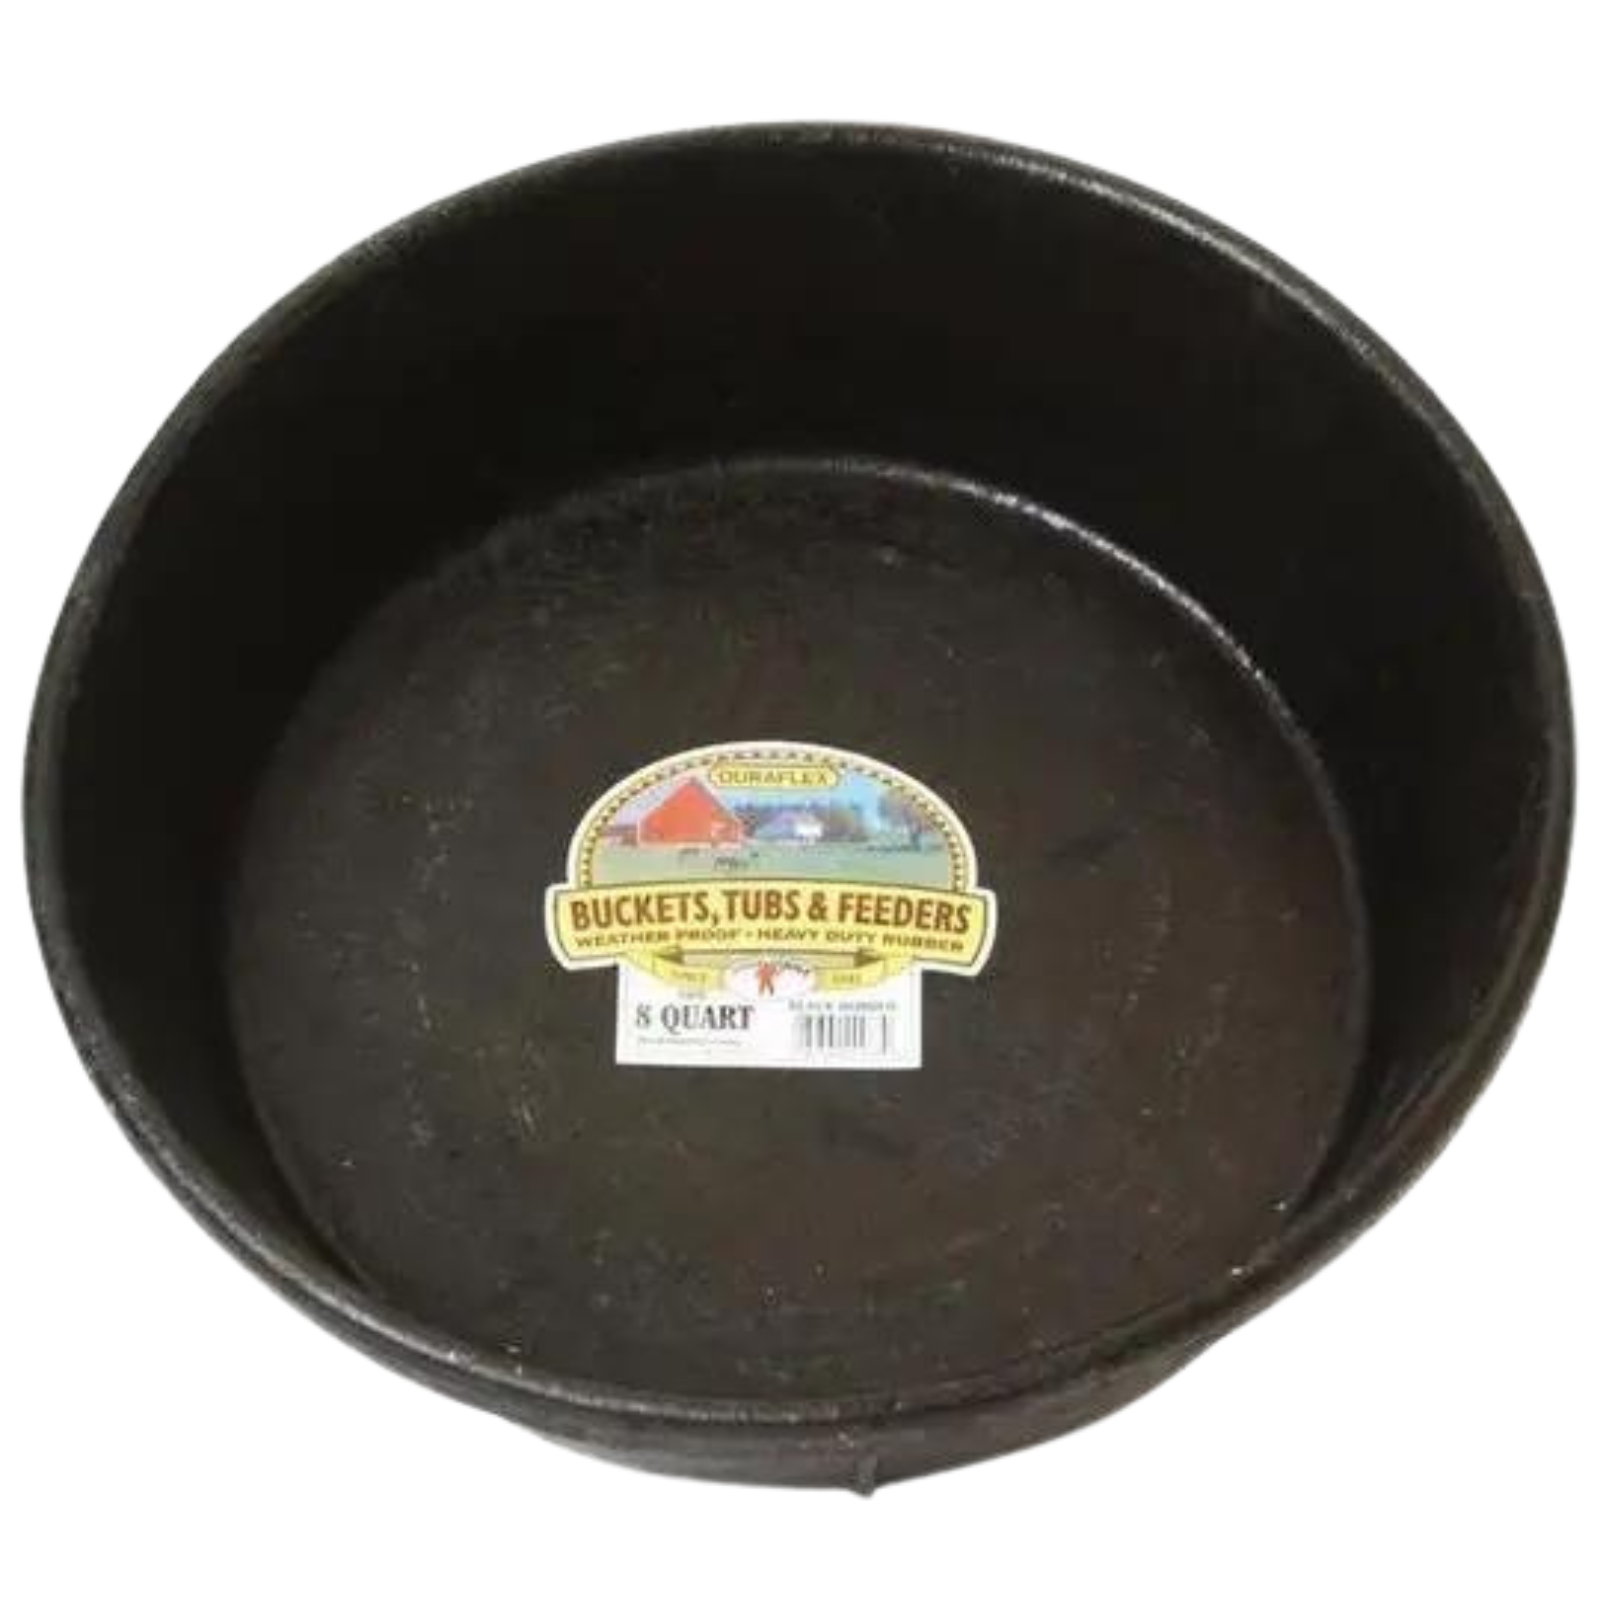 Little Giant Rubber Feed Pan in Black - 8 Quarts